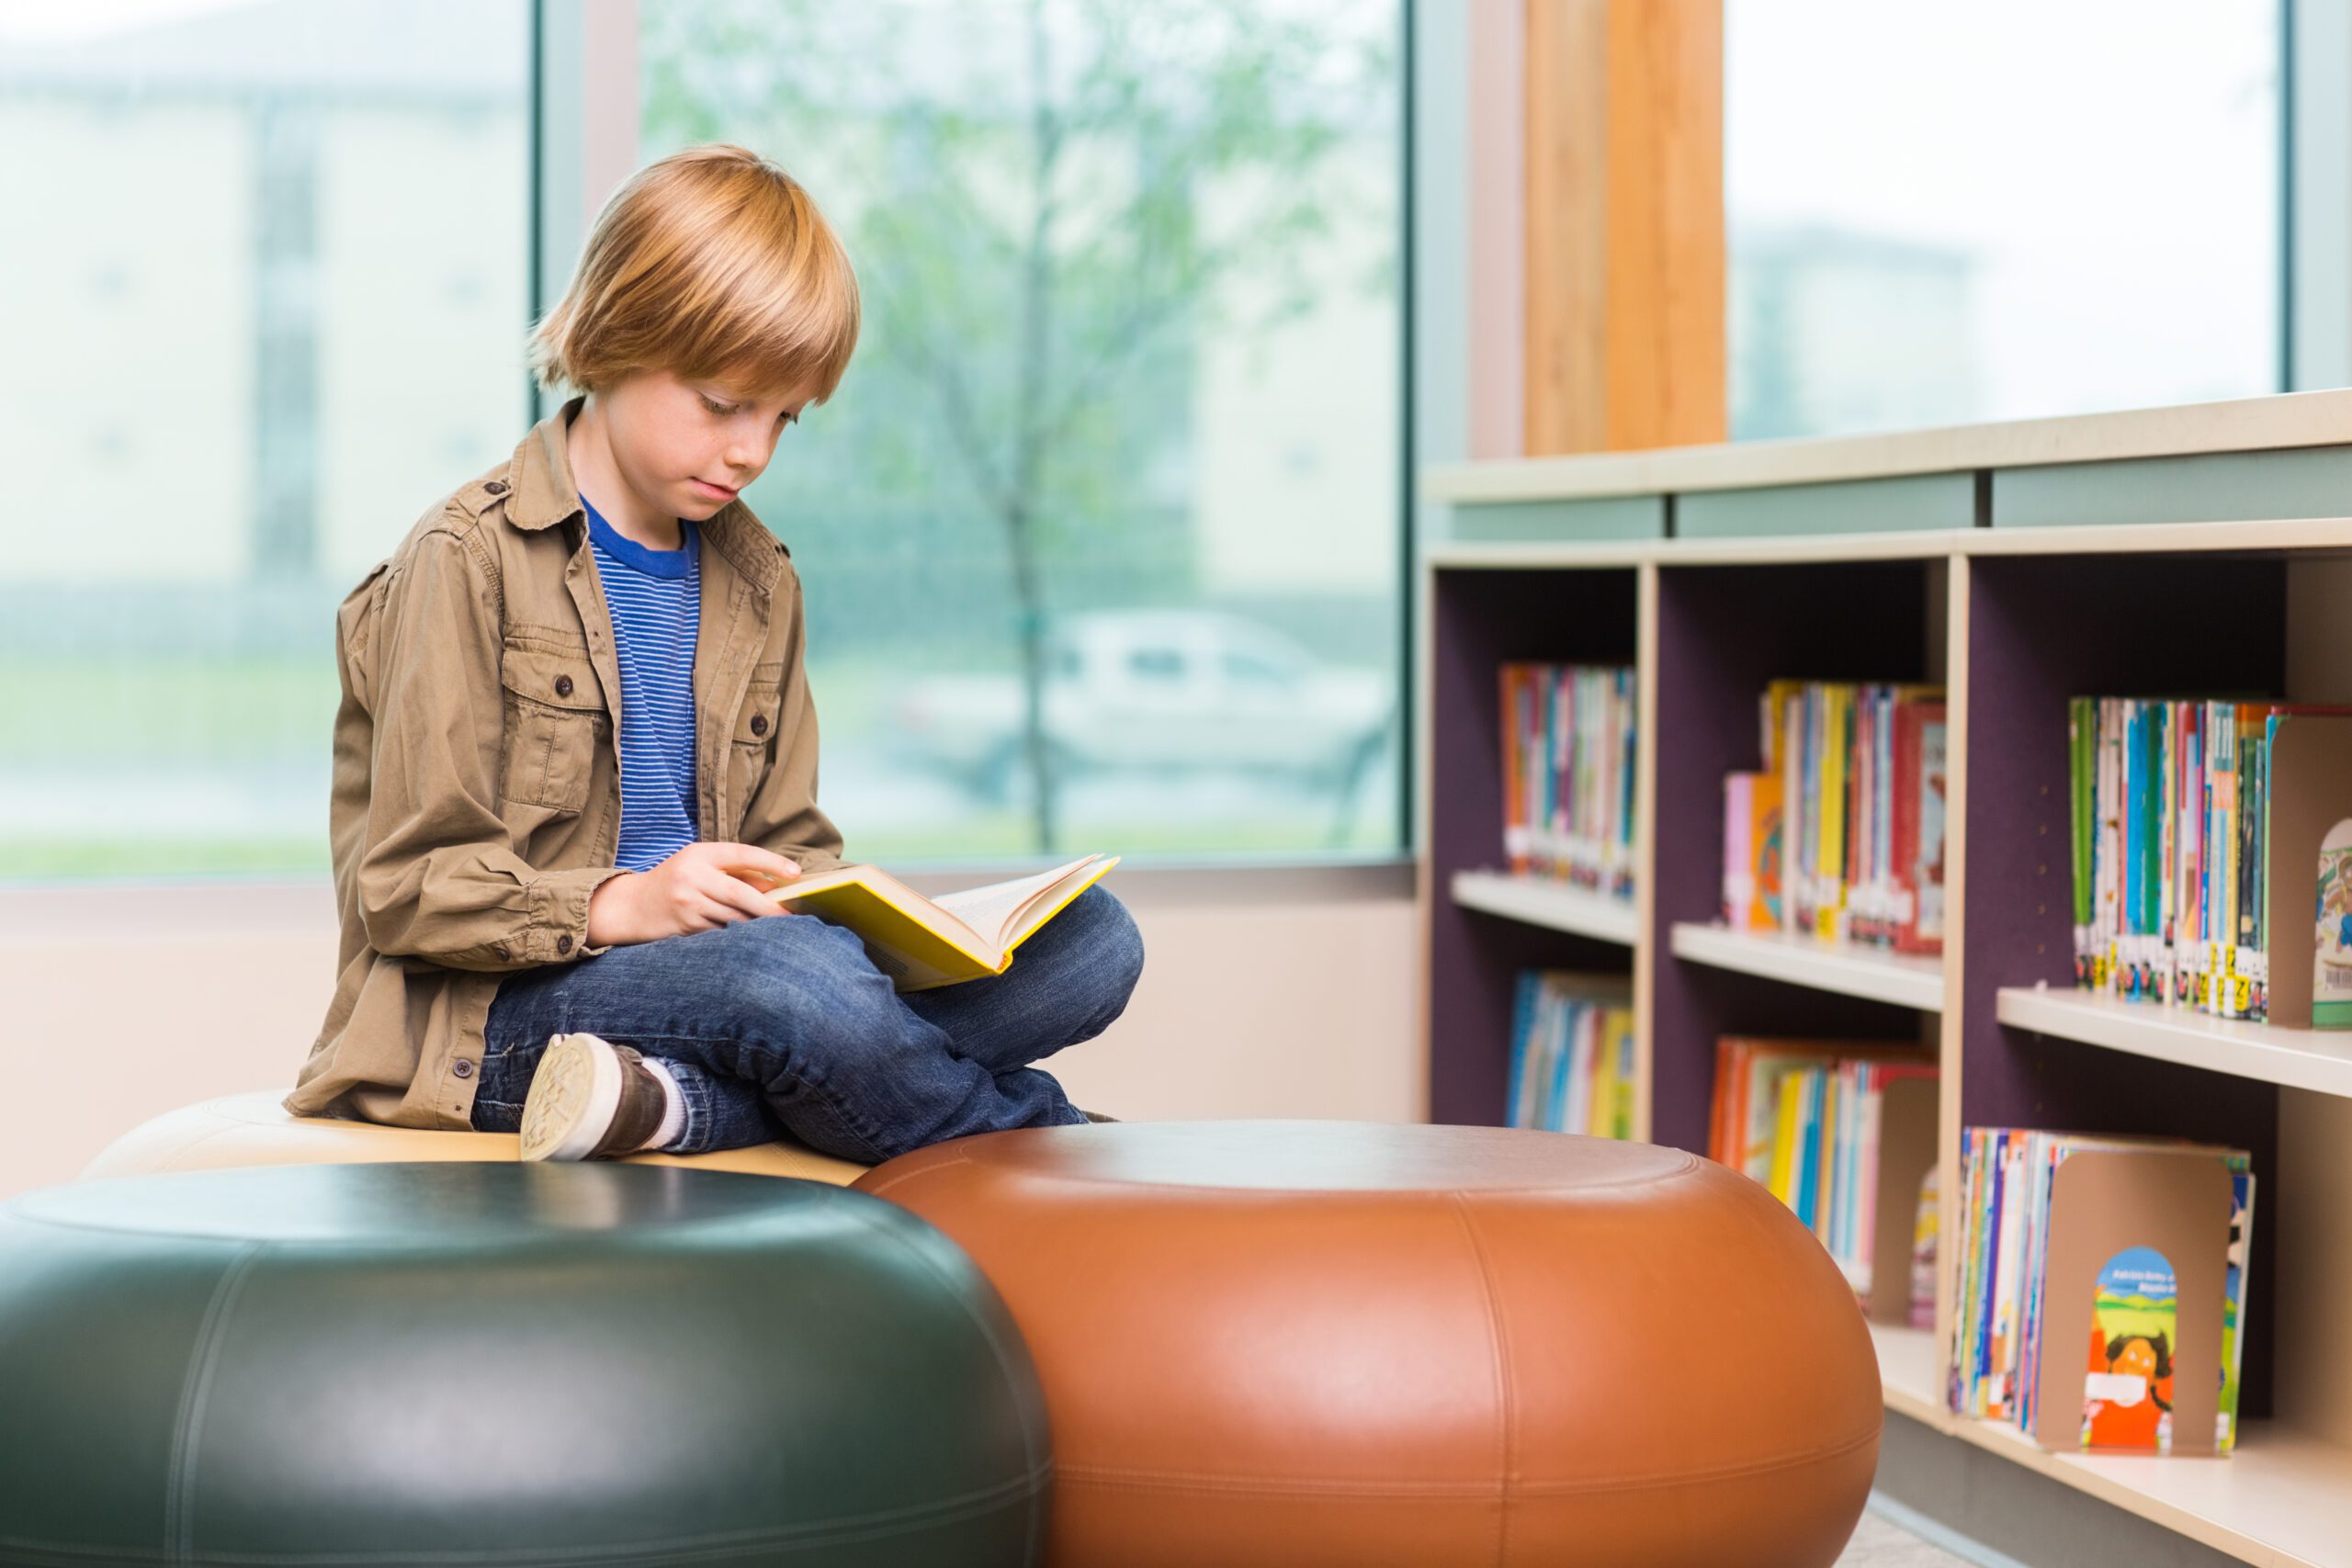 Young,Boy,Reading,Book,In,School,Library